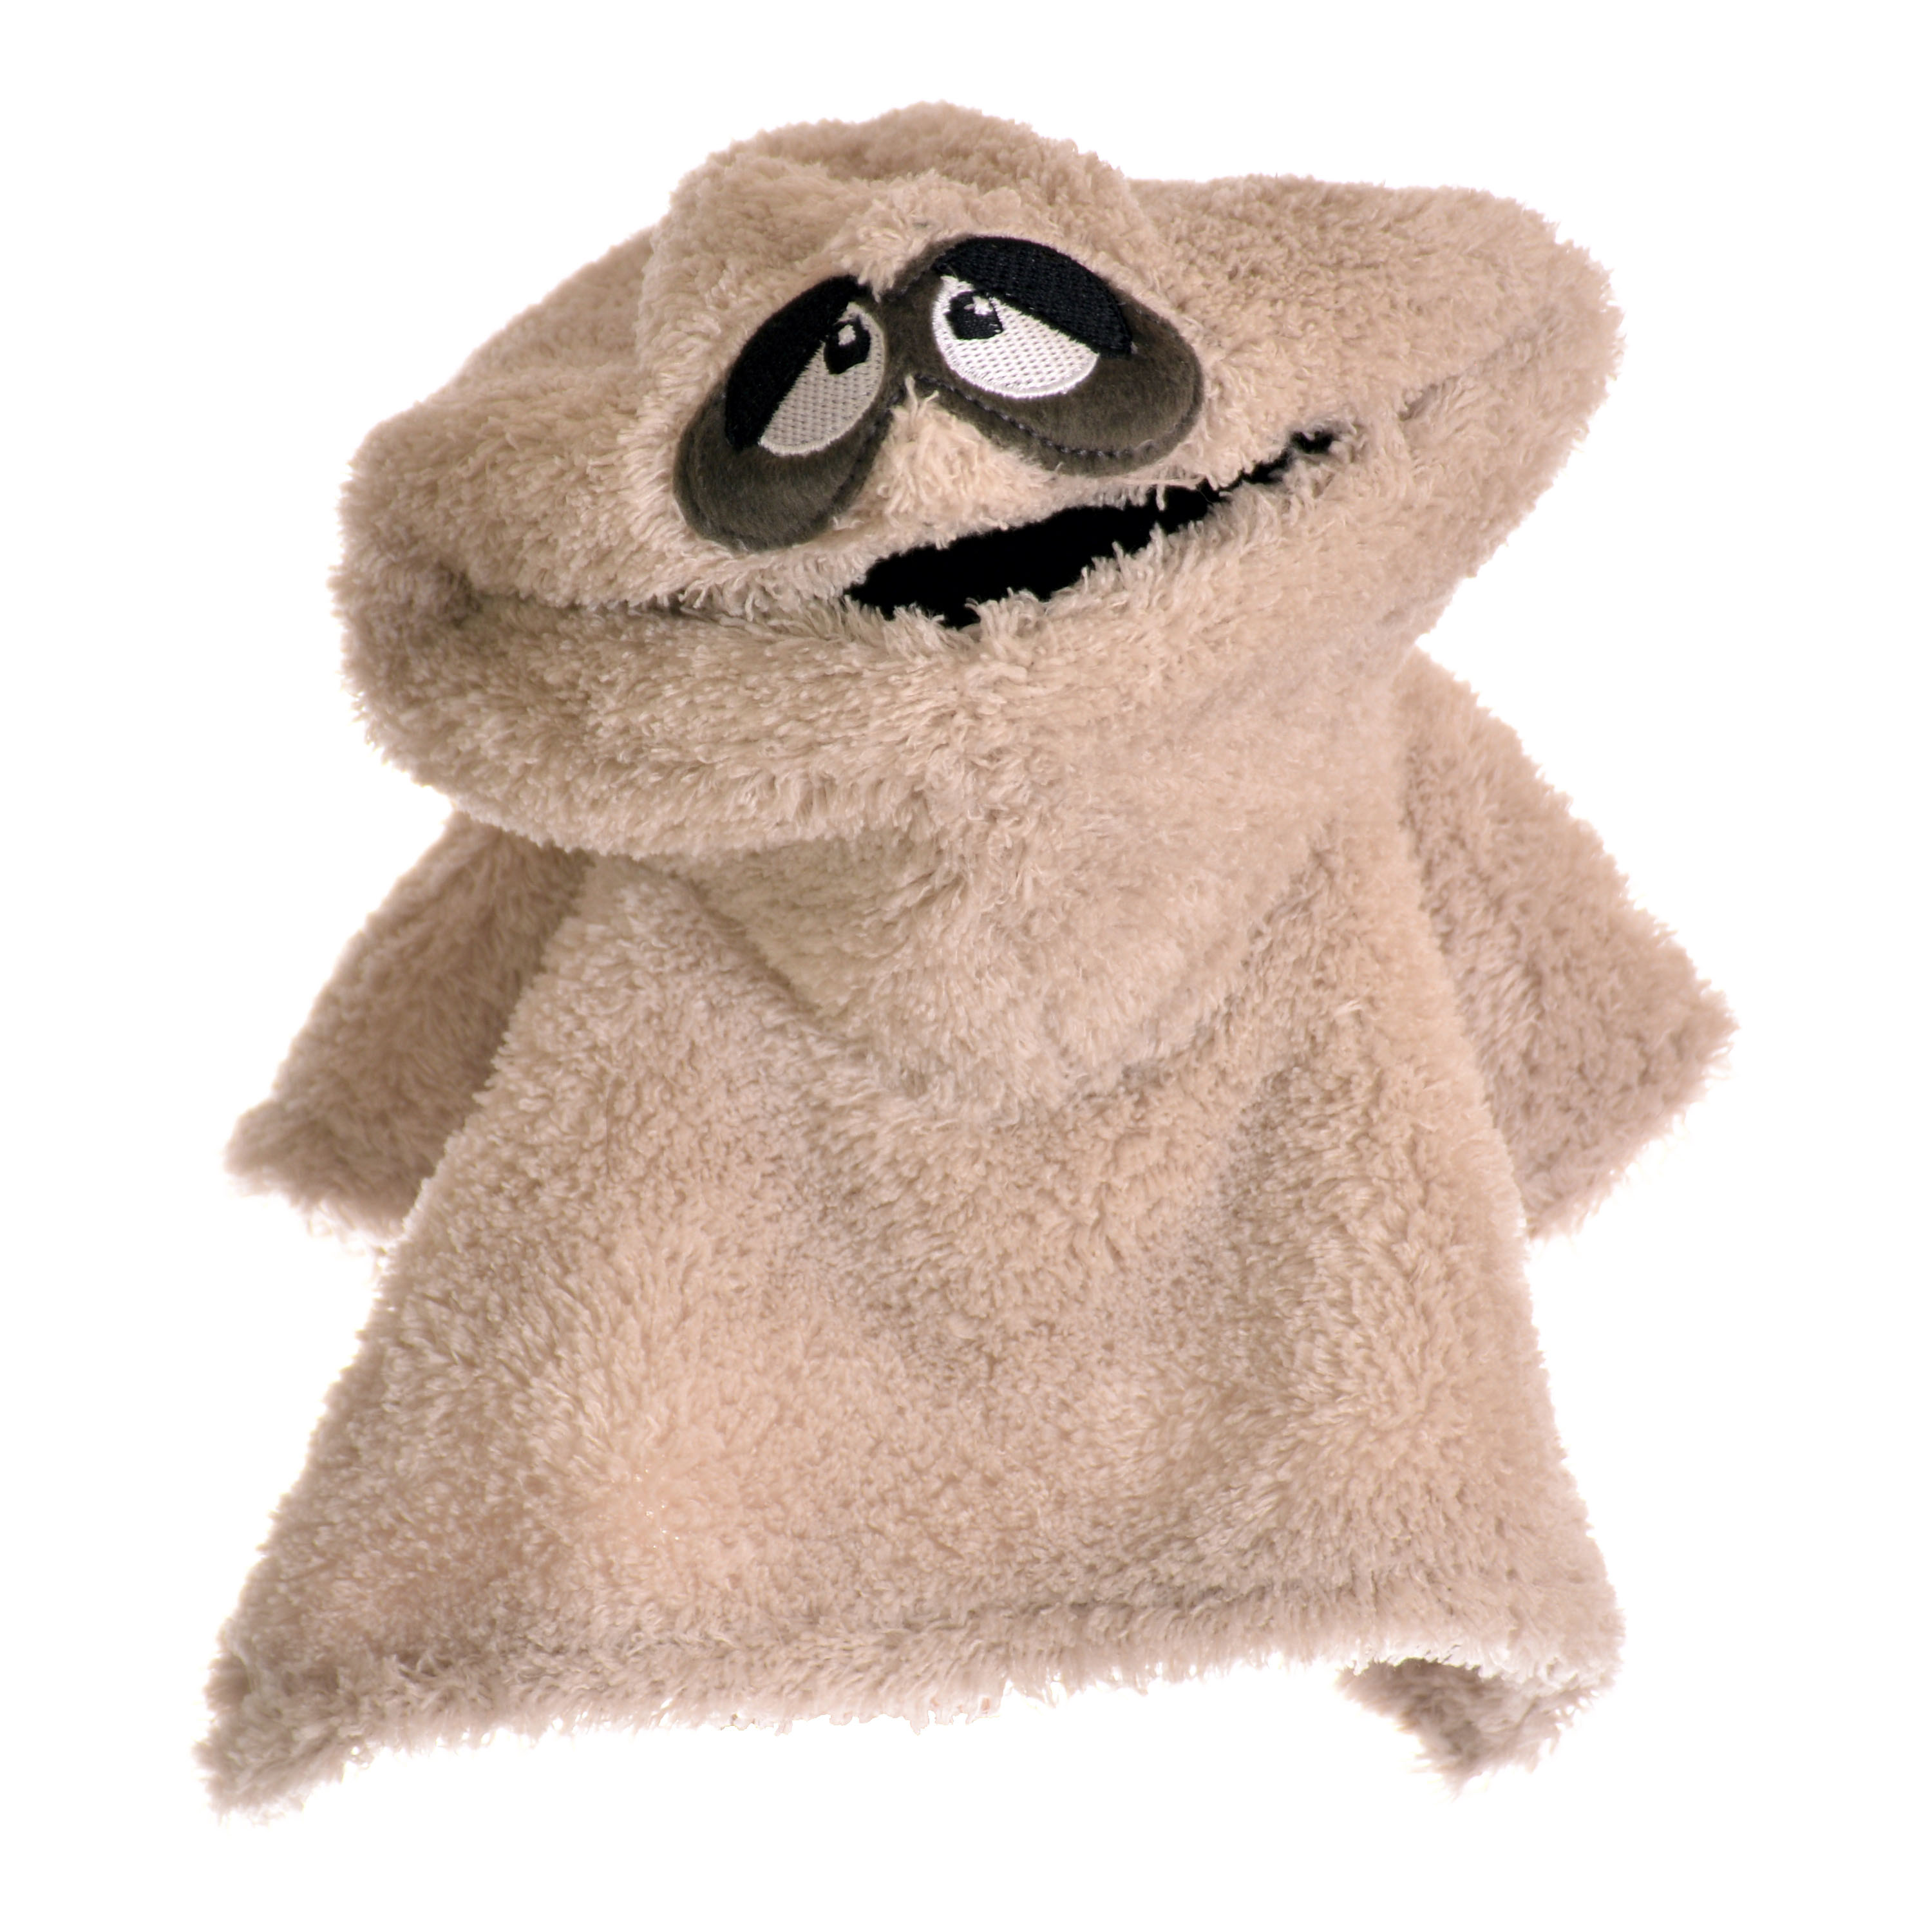 Living Puppets hand puppet whiner - Wiwaldi & CO. by Living Puppets